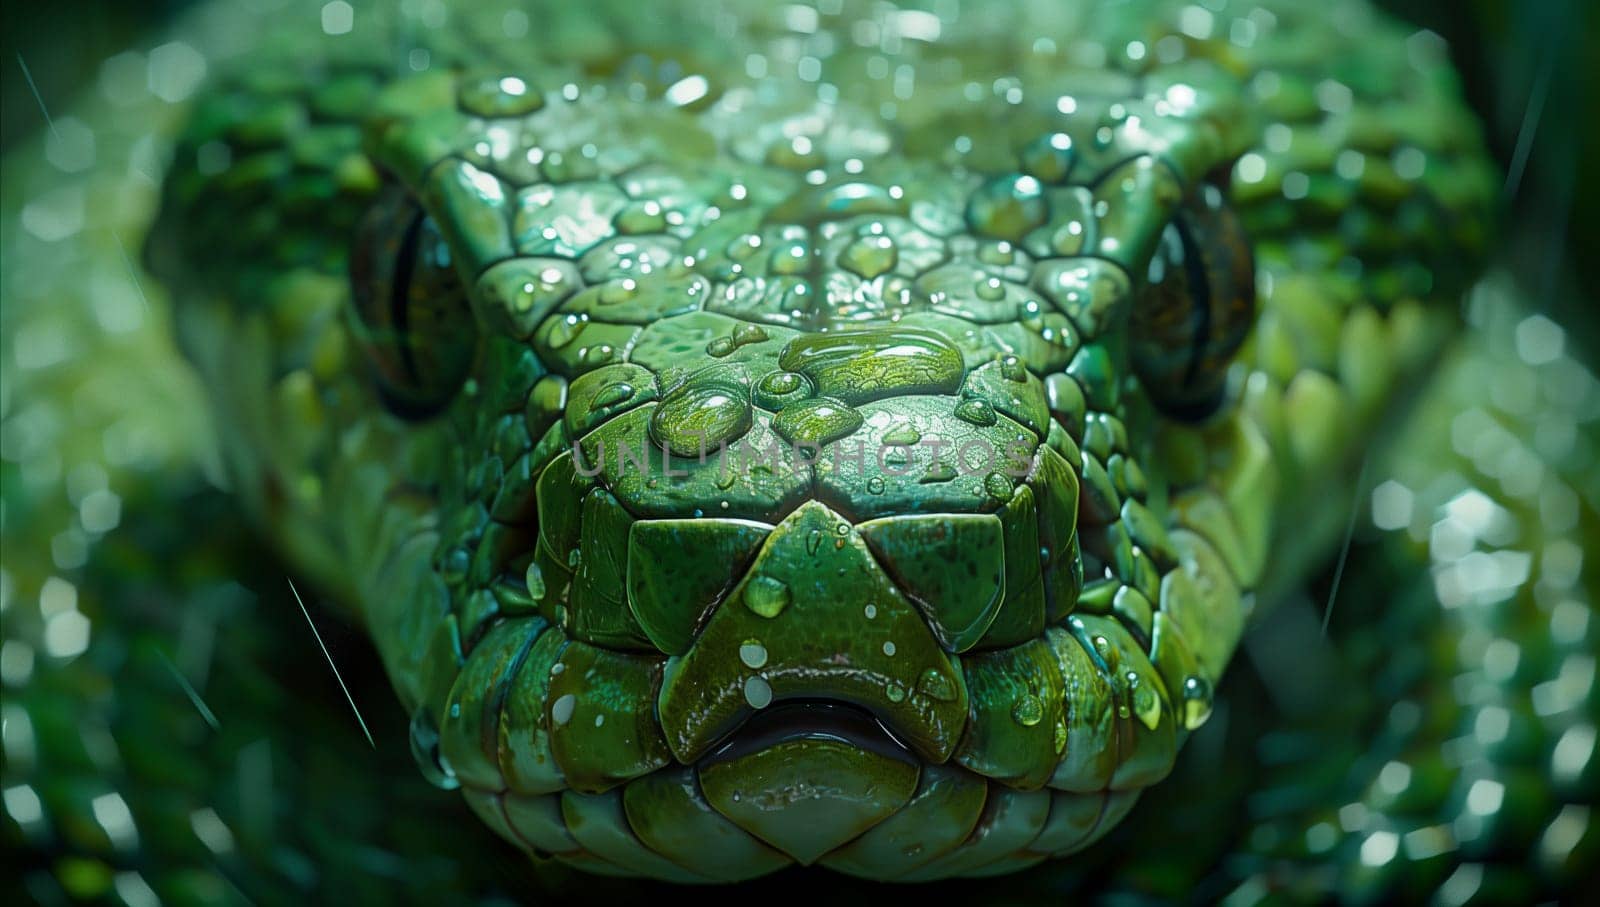 A close up of a green snakes face with water drops on it, showcasing the intricate symmetry of a terrestrial animal in the jungle, captured through macro photography